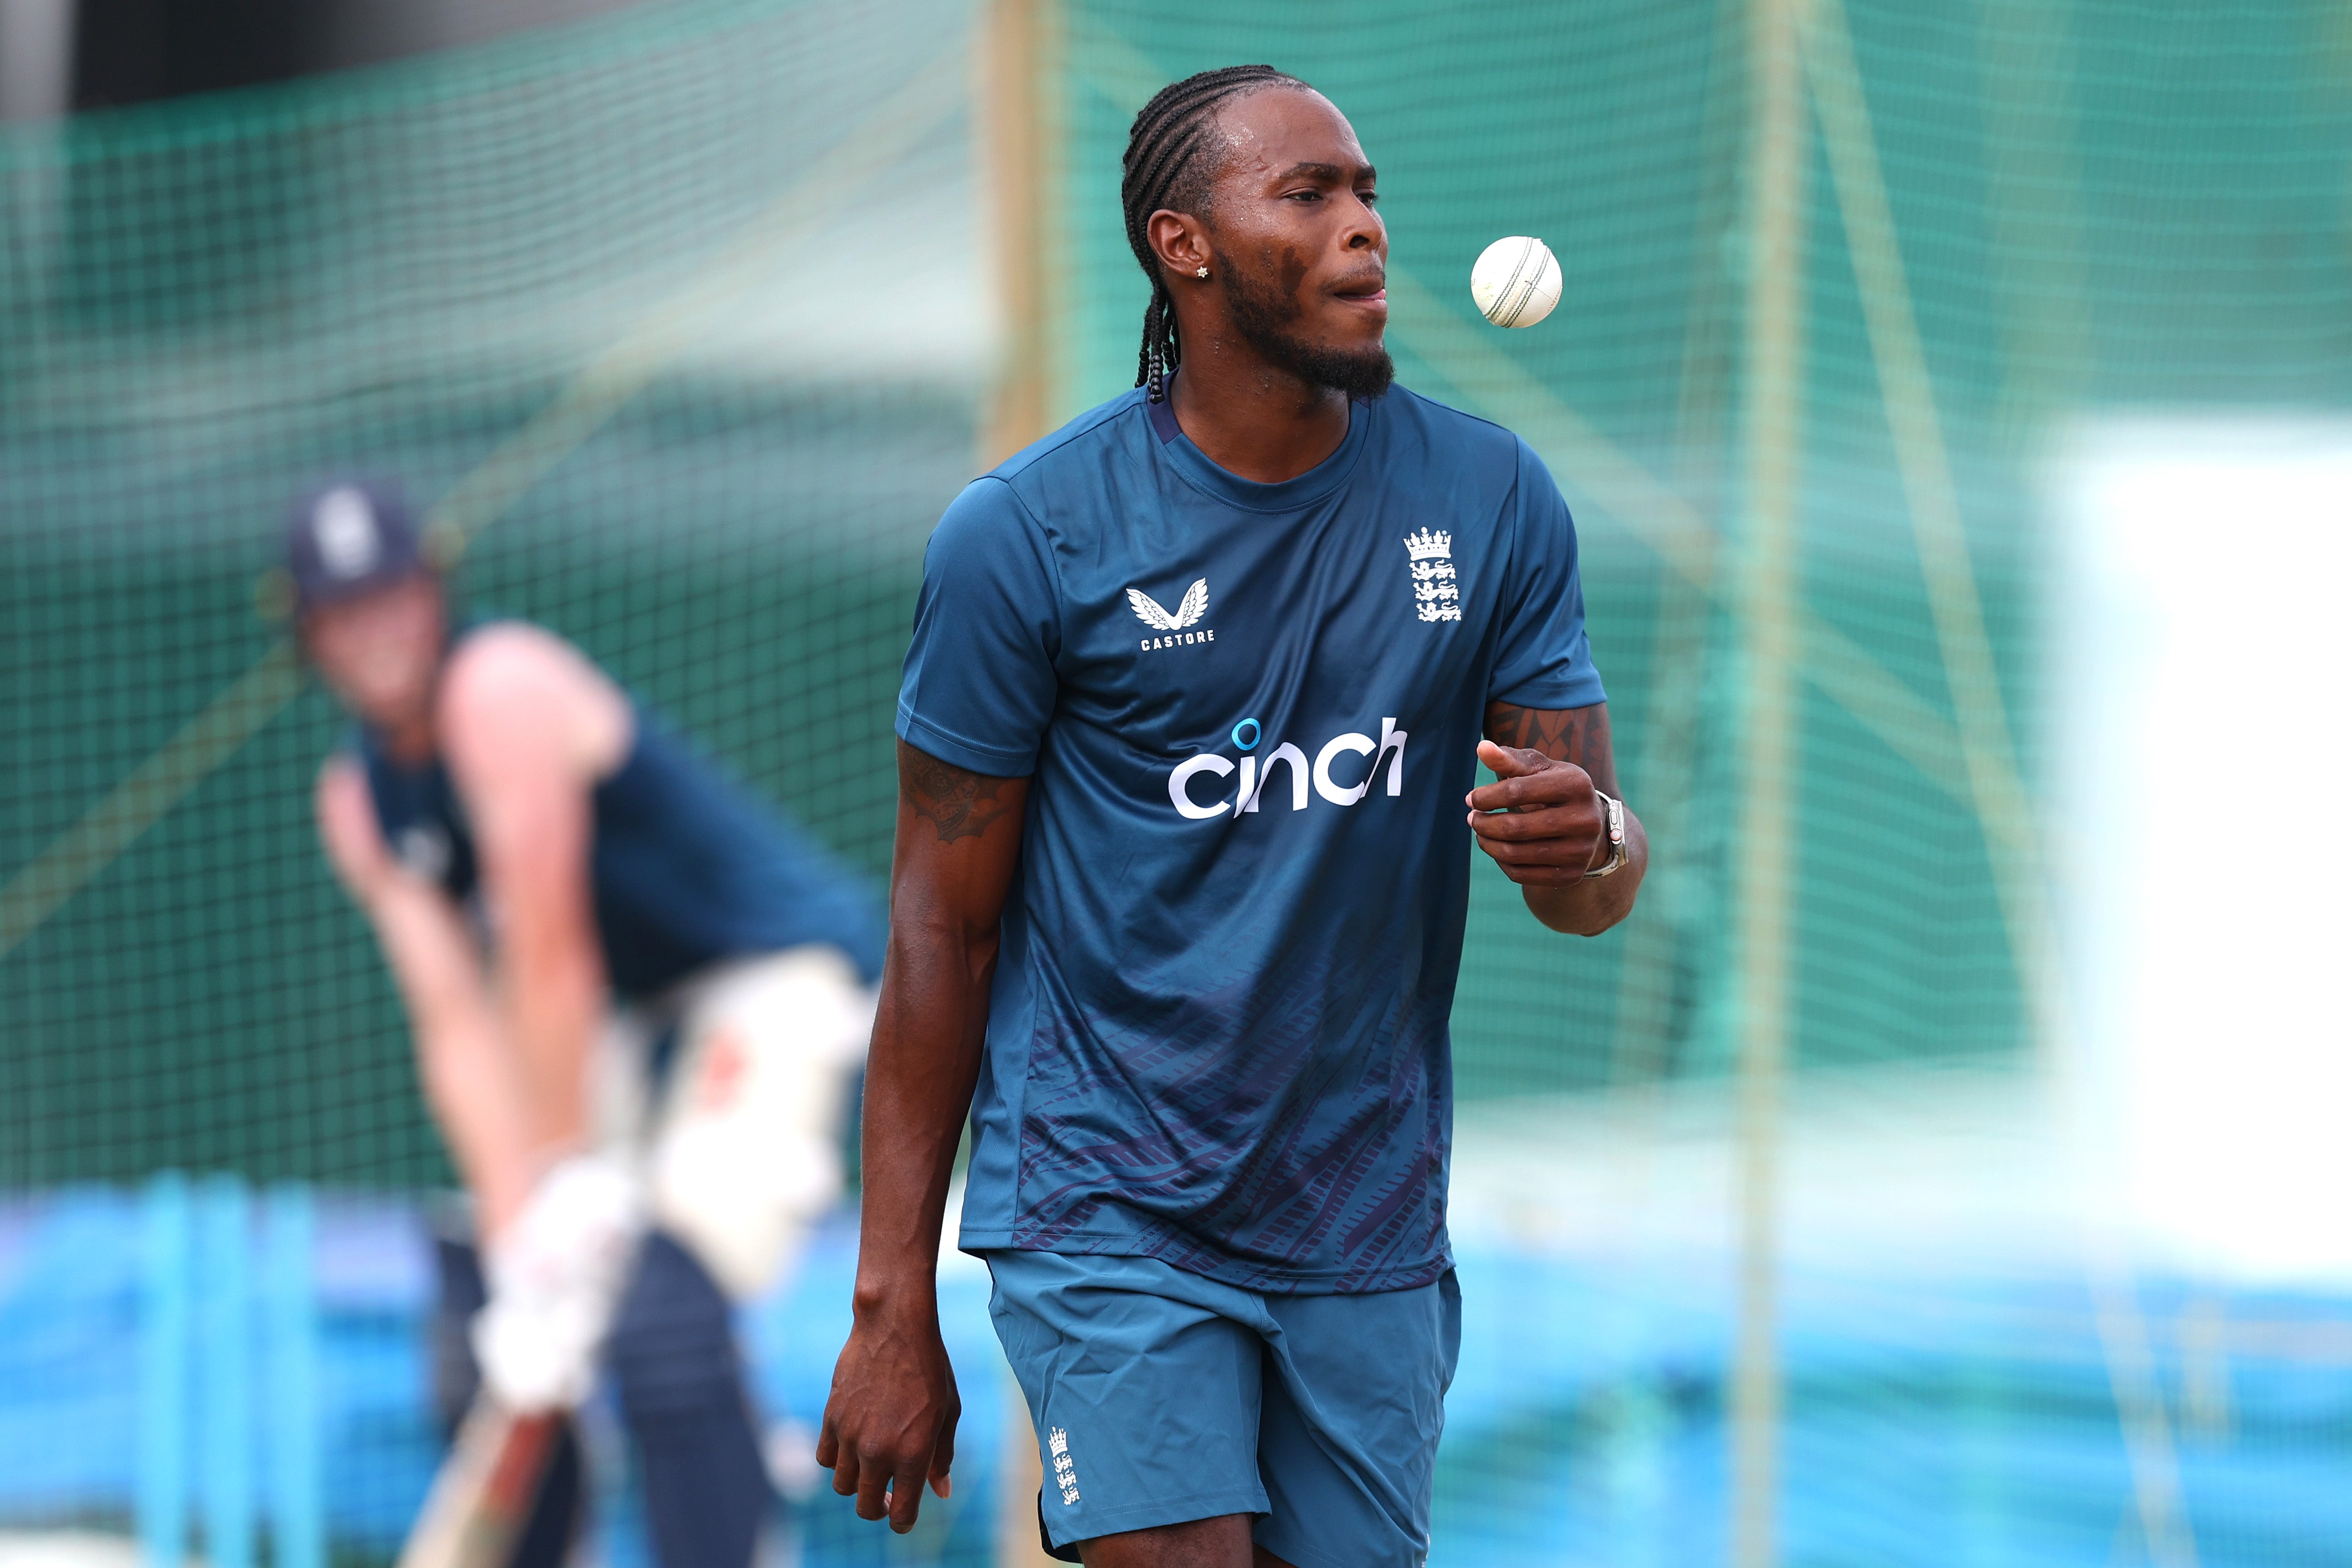 Jofra Archer took part in one of England’s training sessions in Barbados